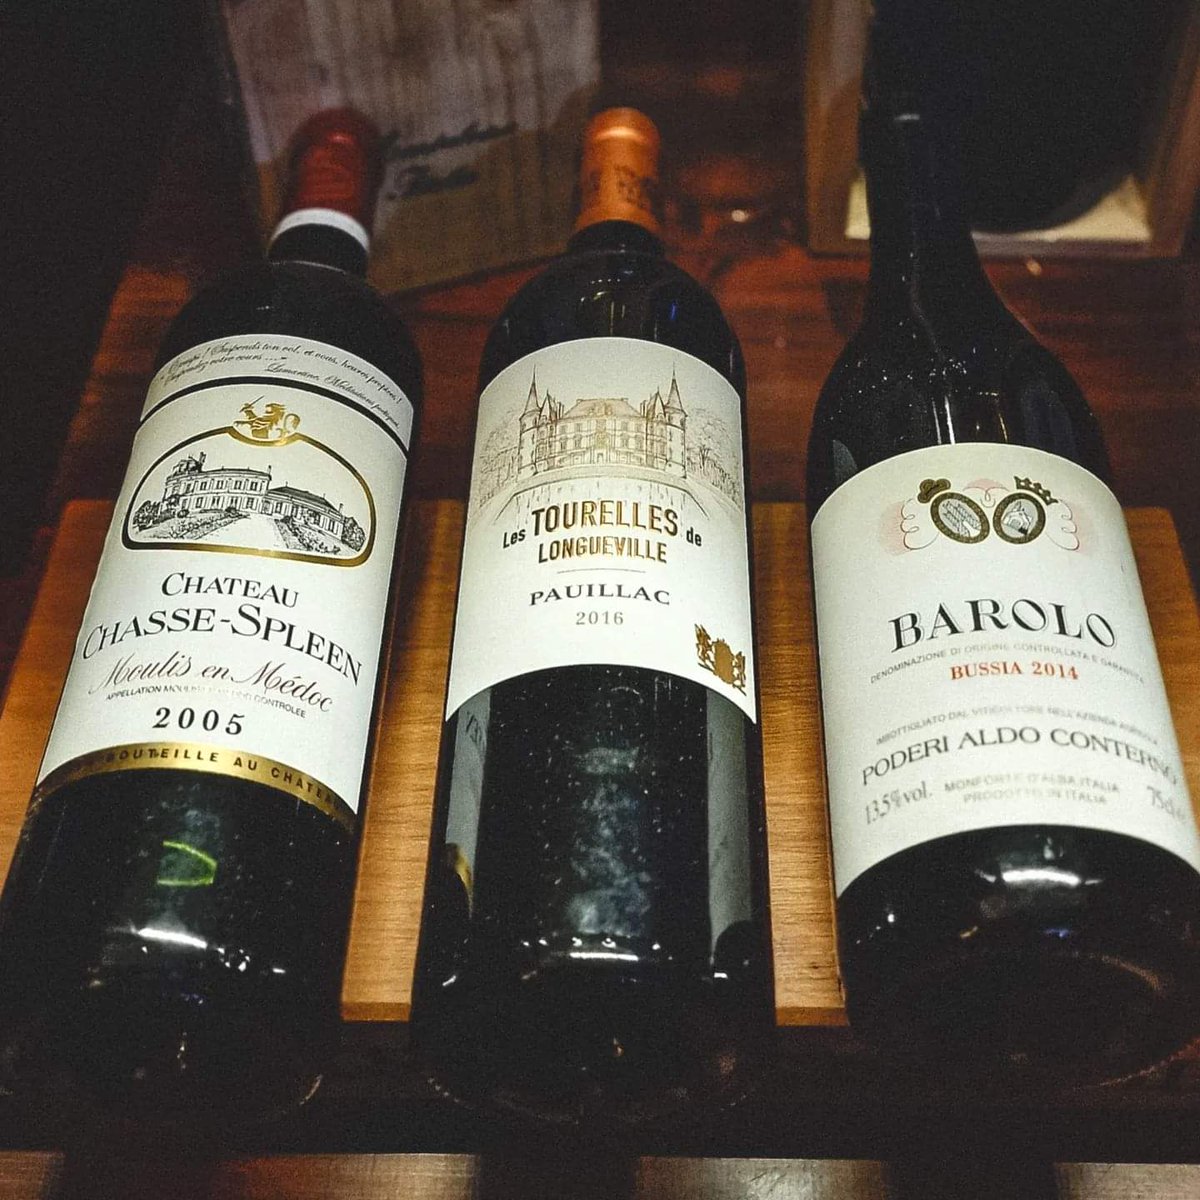 'All wines should be tasted; some should only be sipped, but with others, drink the whole bottle.'
- P. Coelho 🍾 Wine Wednesday tonight and every Wednesday .. treat yourself. #goodfood #gooddrinks #greatwines #theneighbourhood #oldstreetdublin #winecellar #winelist #halfprice